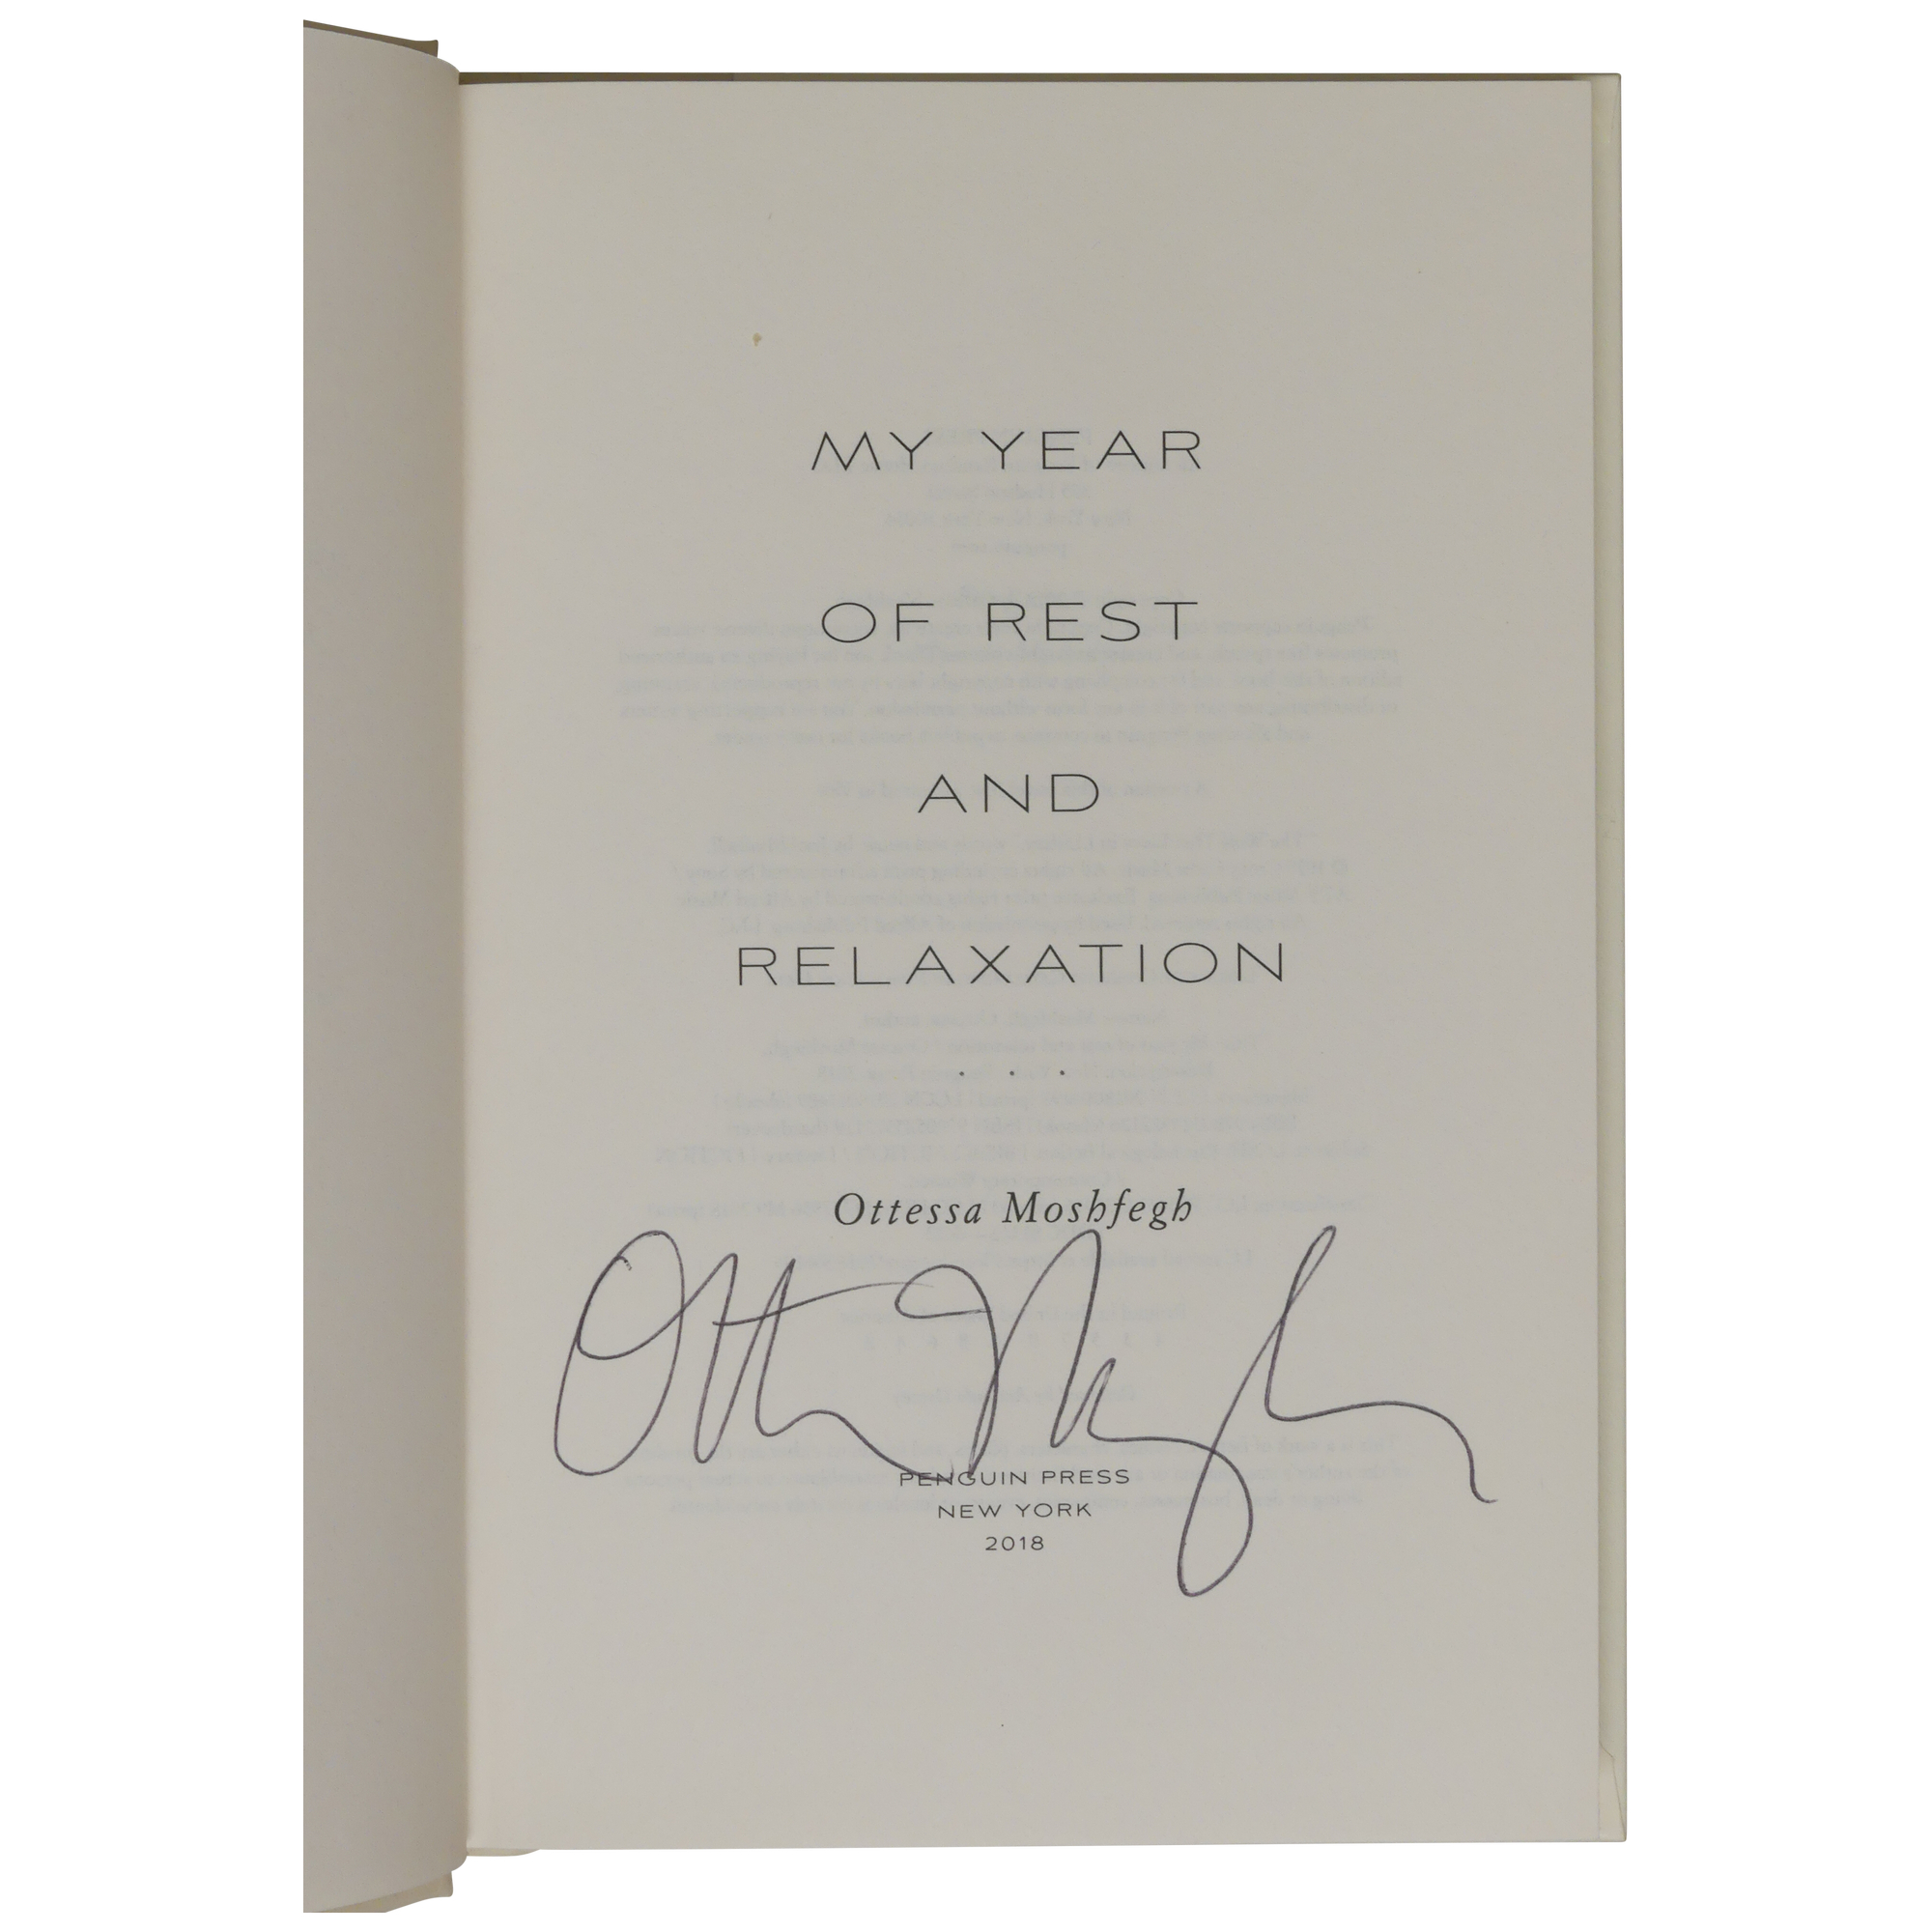 My Year of Rest and Relaxation (Hardcover)